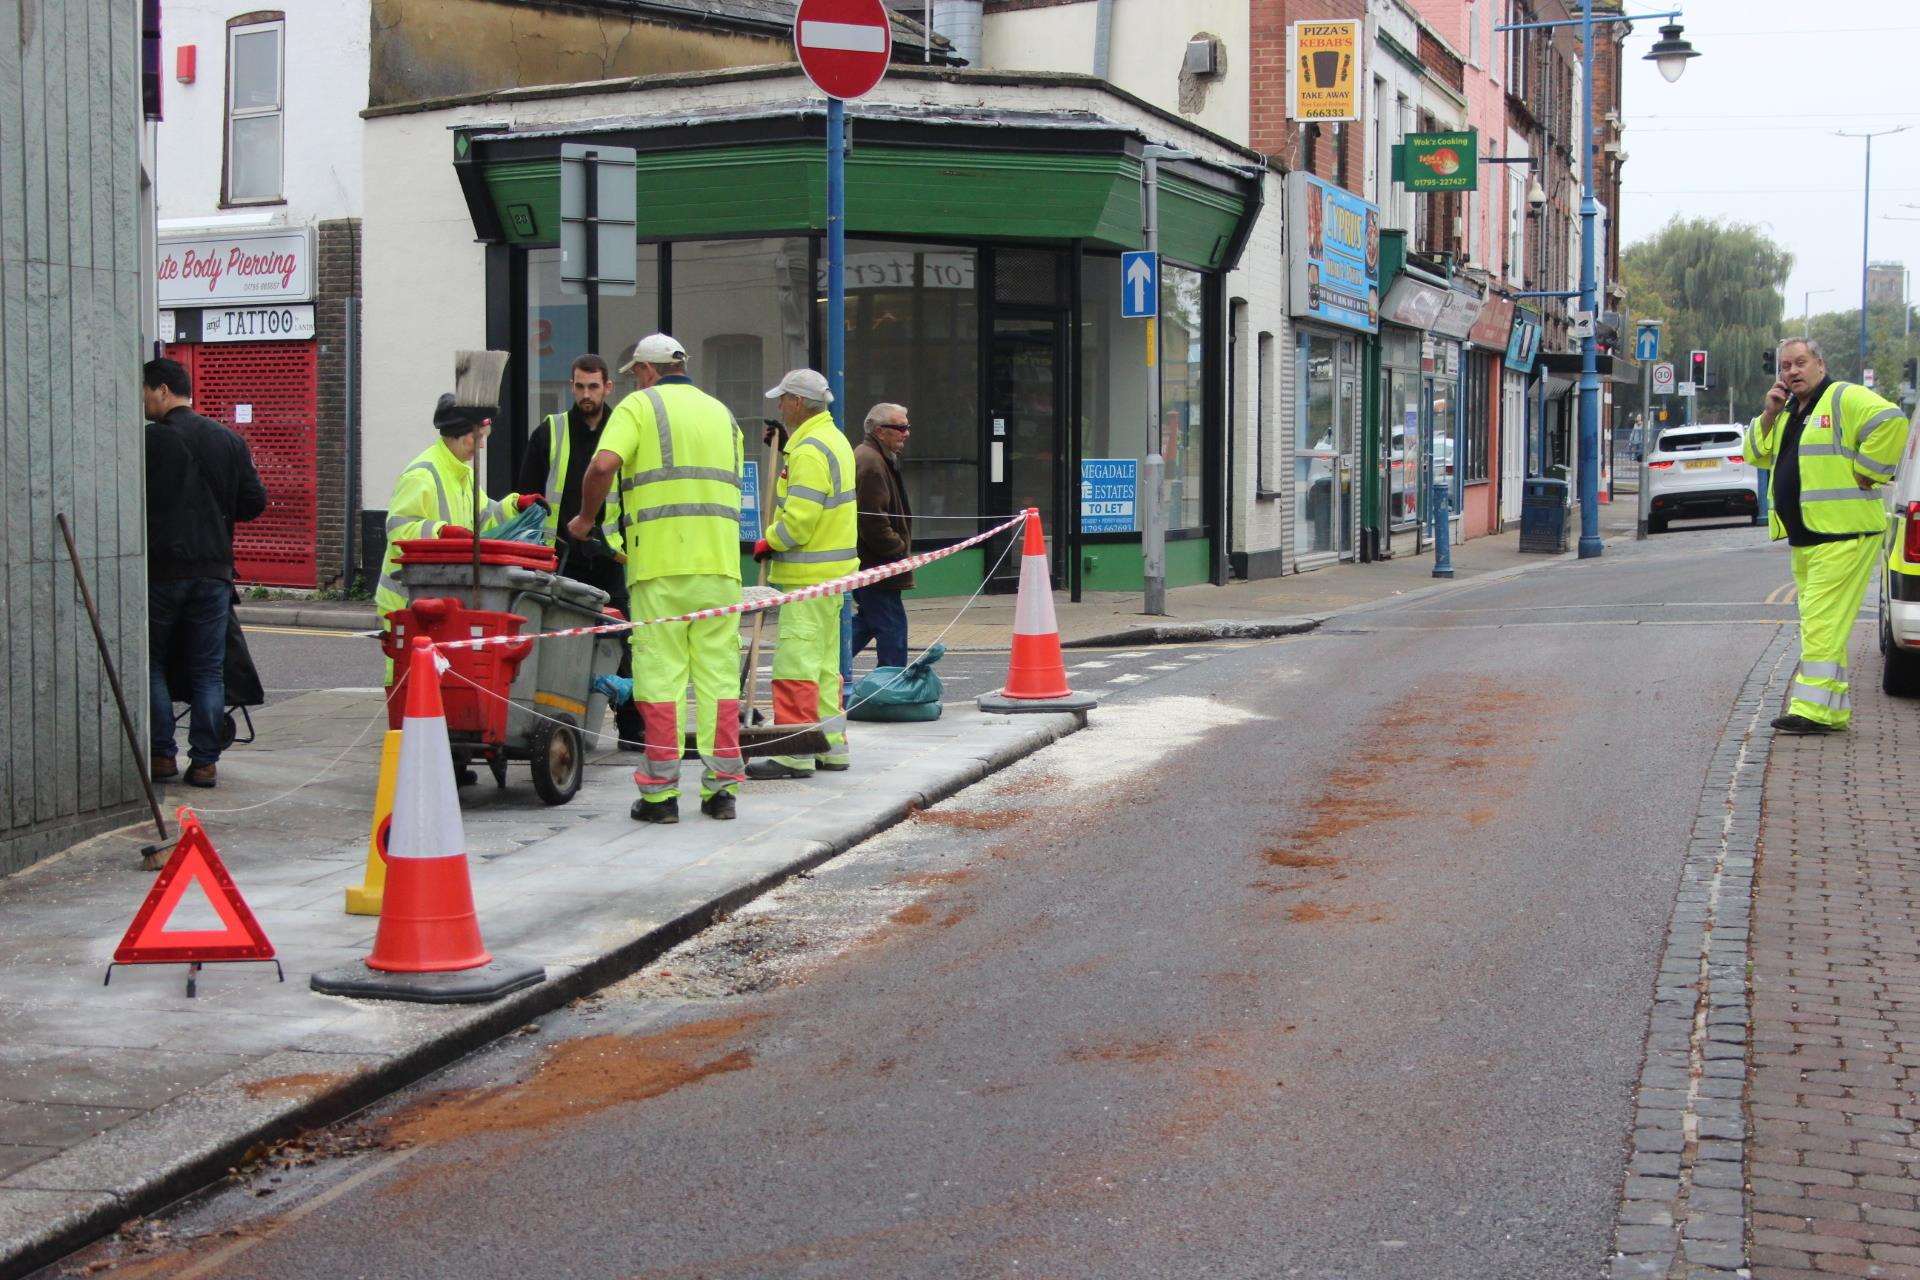 Workers cleaned up the pavement after a woman slipping on oil in Sheerness High Street on Monday